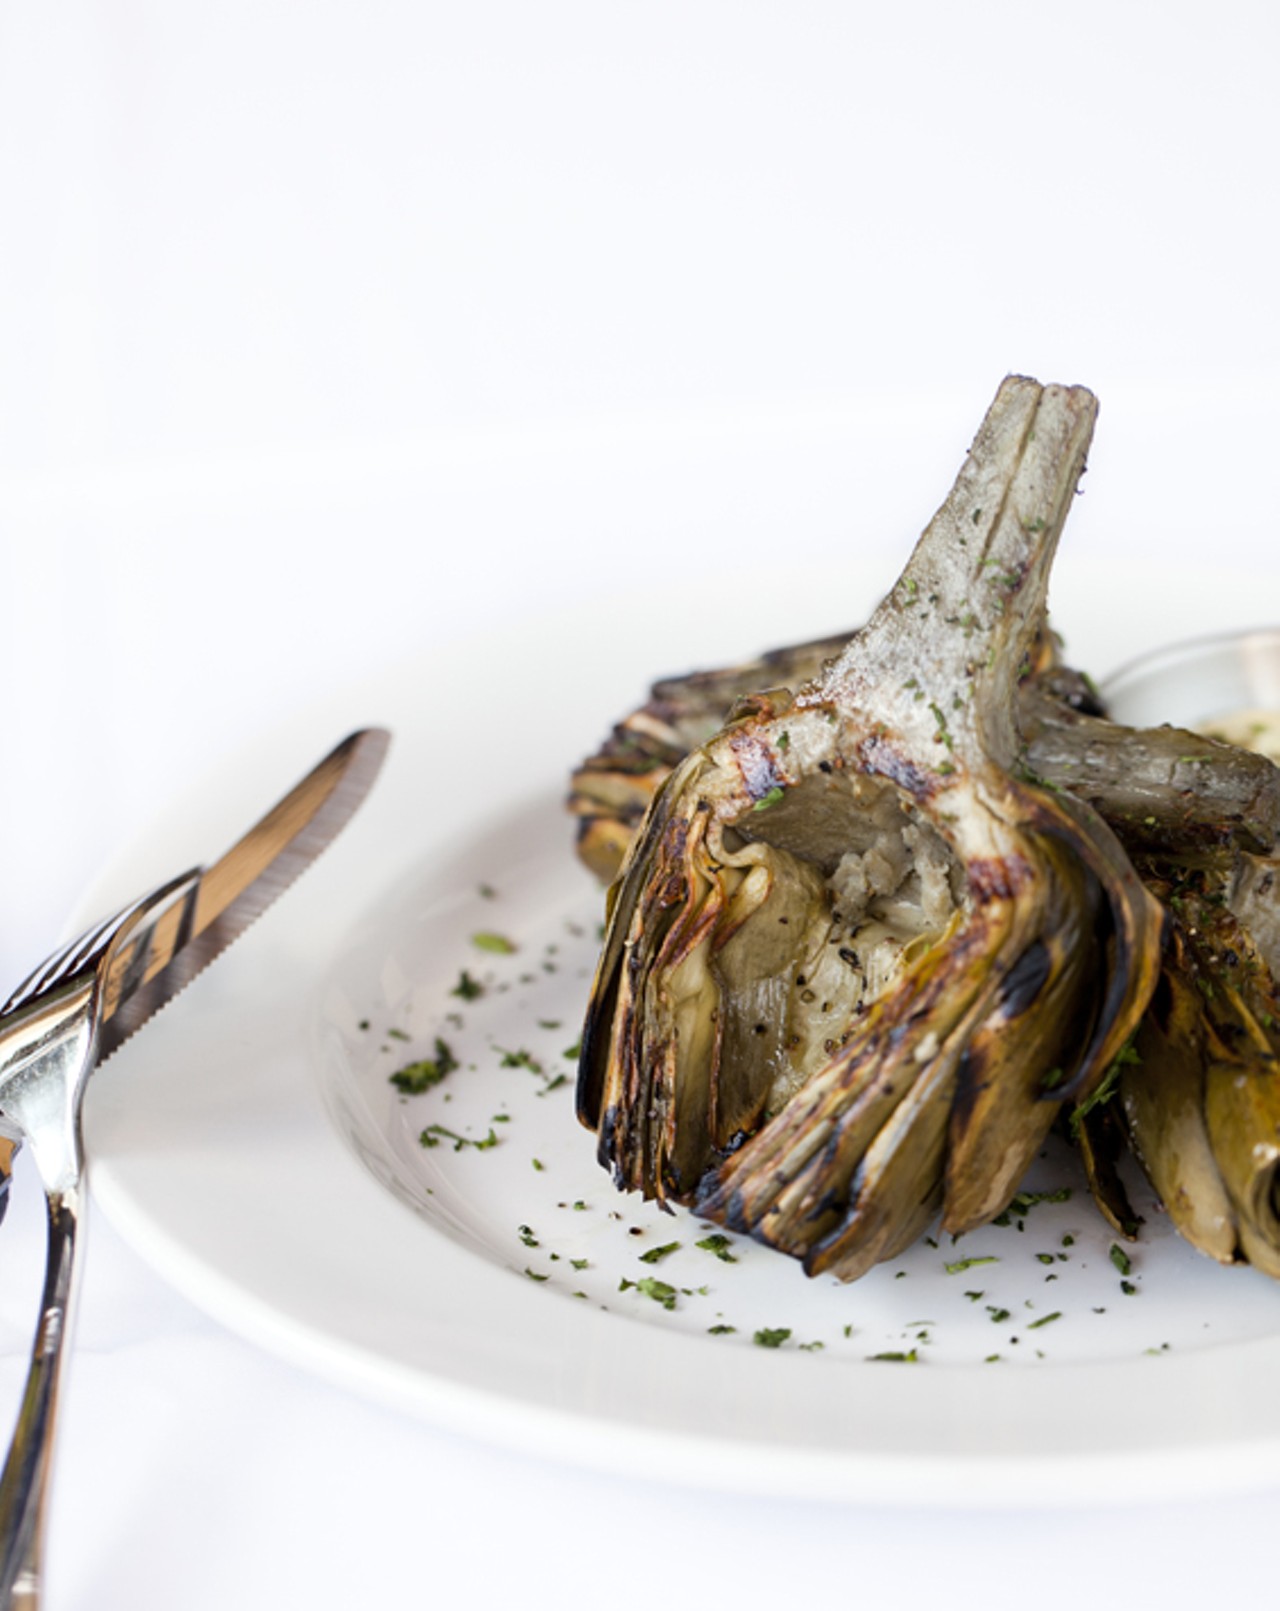 Grilled Artichoke with a house-made aioli